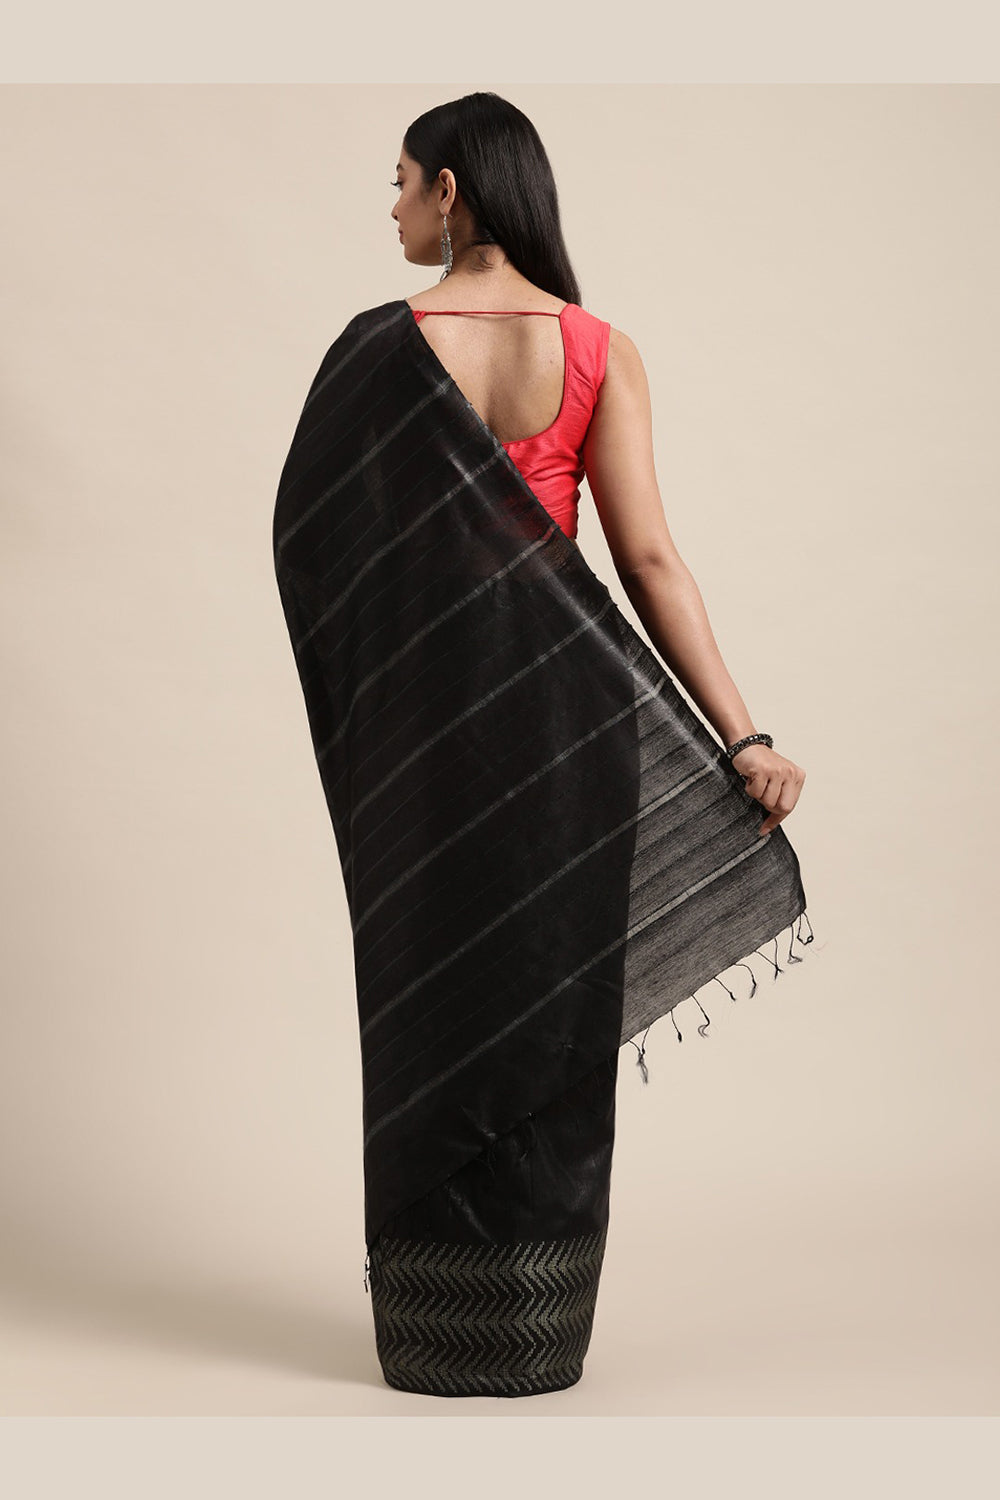 Shop Gina Black Woven Cotton Silk One Minute Saree at best offer at our  Store - One Minute Saree